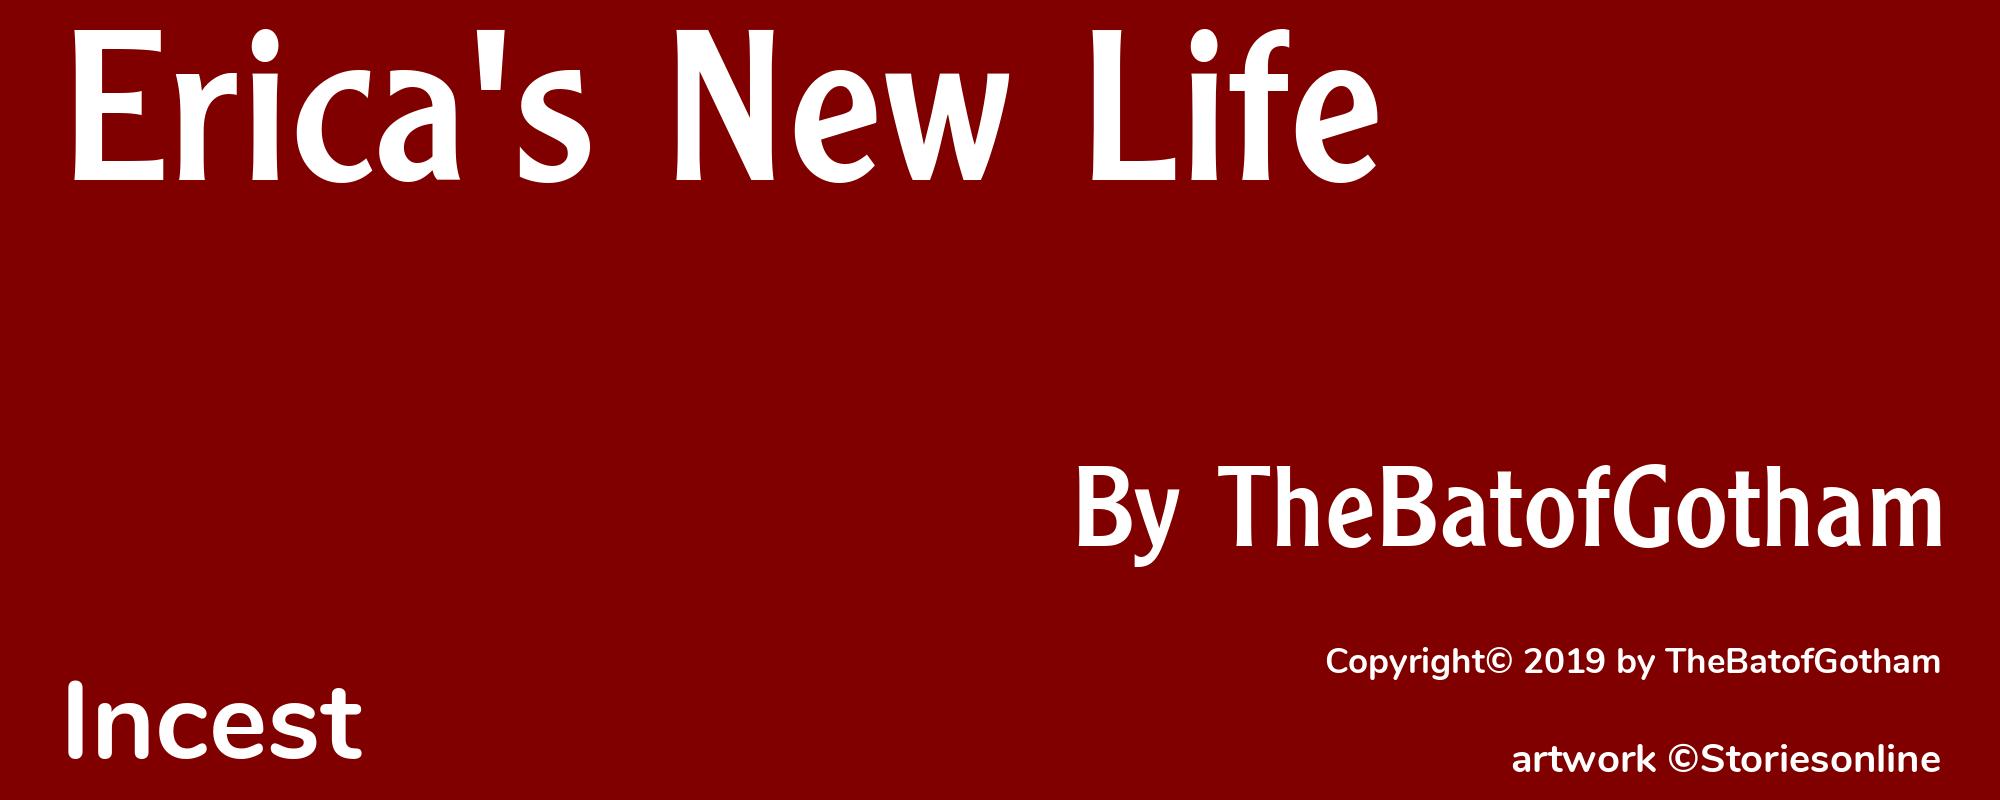 Erica's New Life - Cover